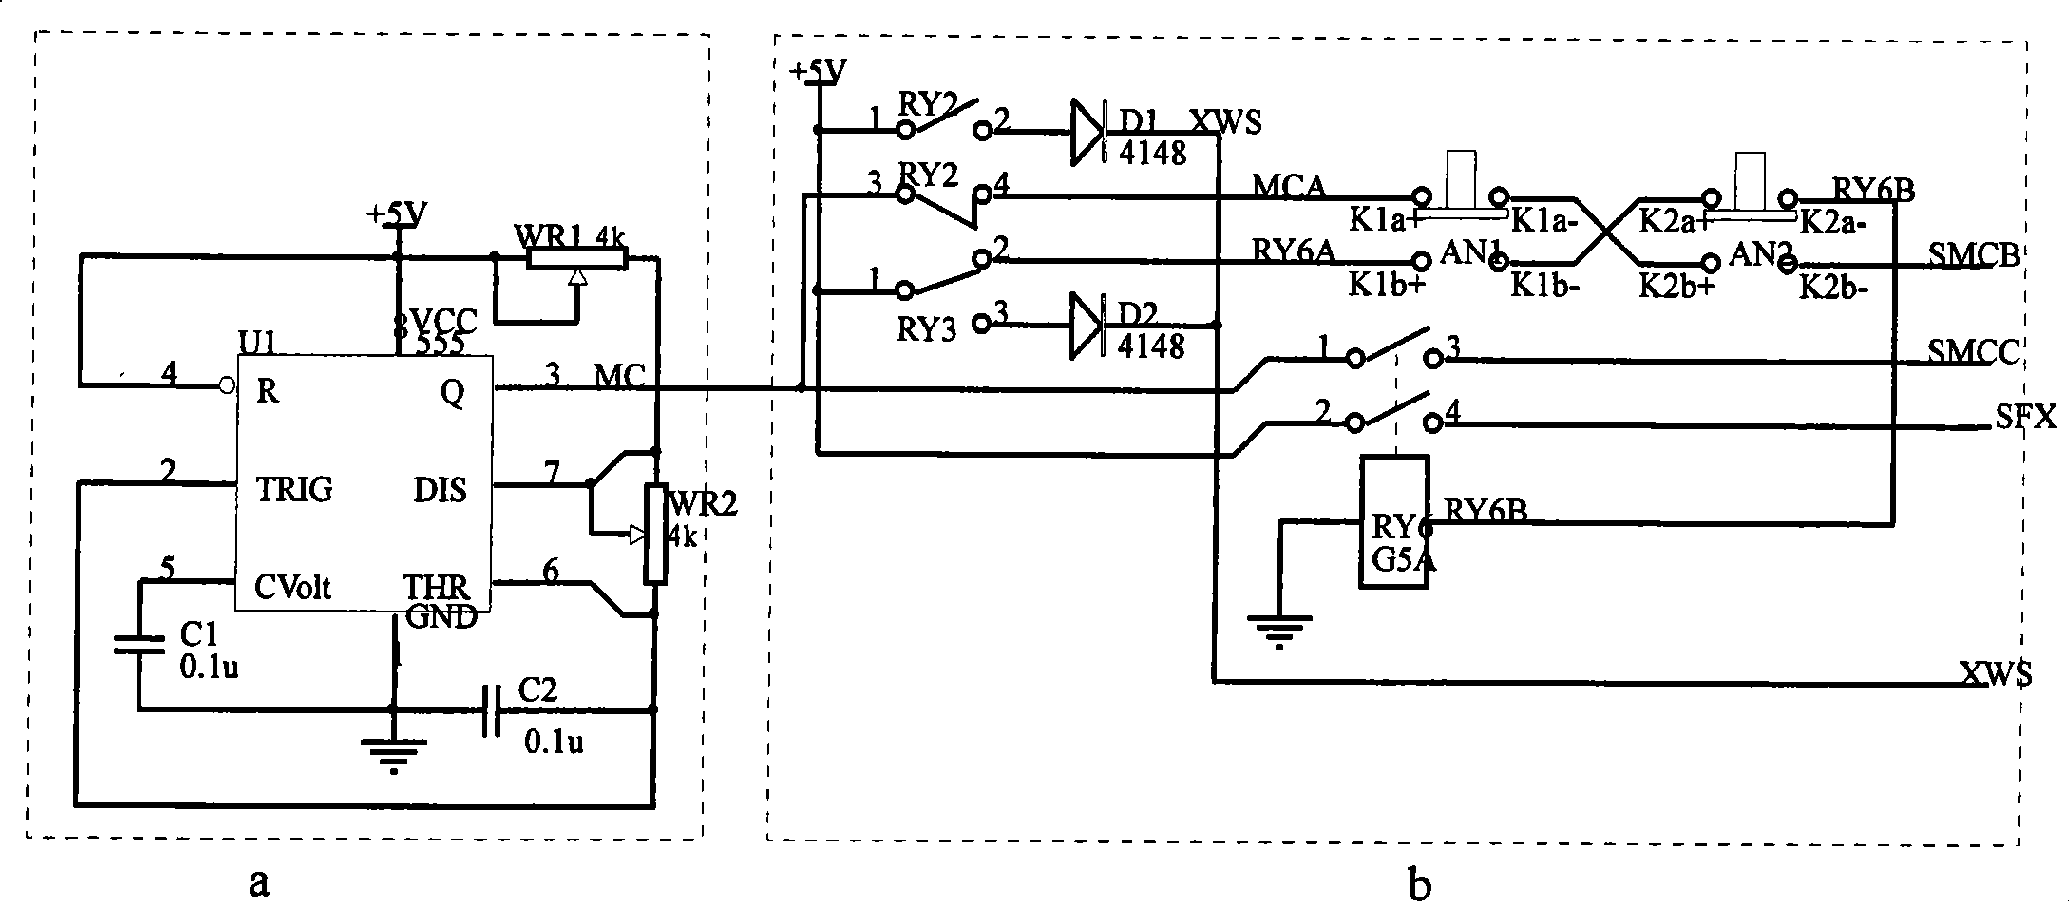 Manual control device for solar automatic tracking system